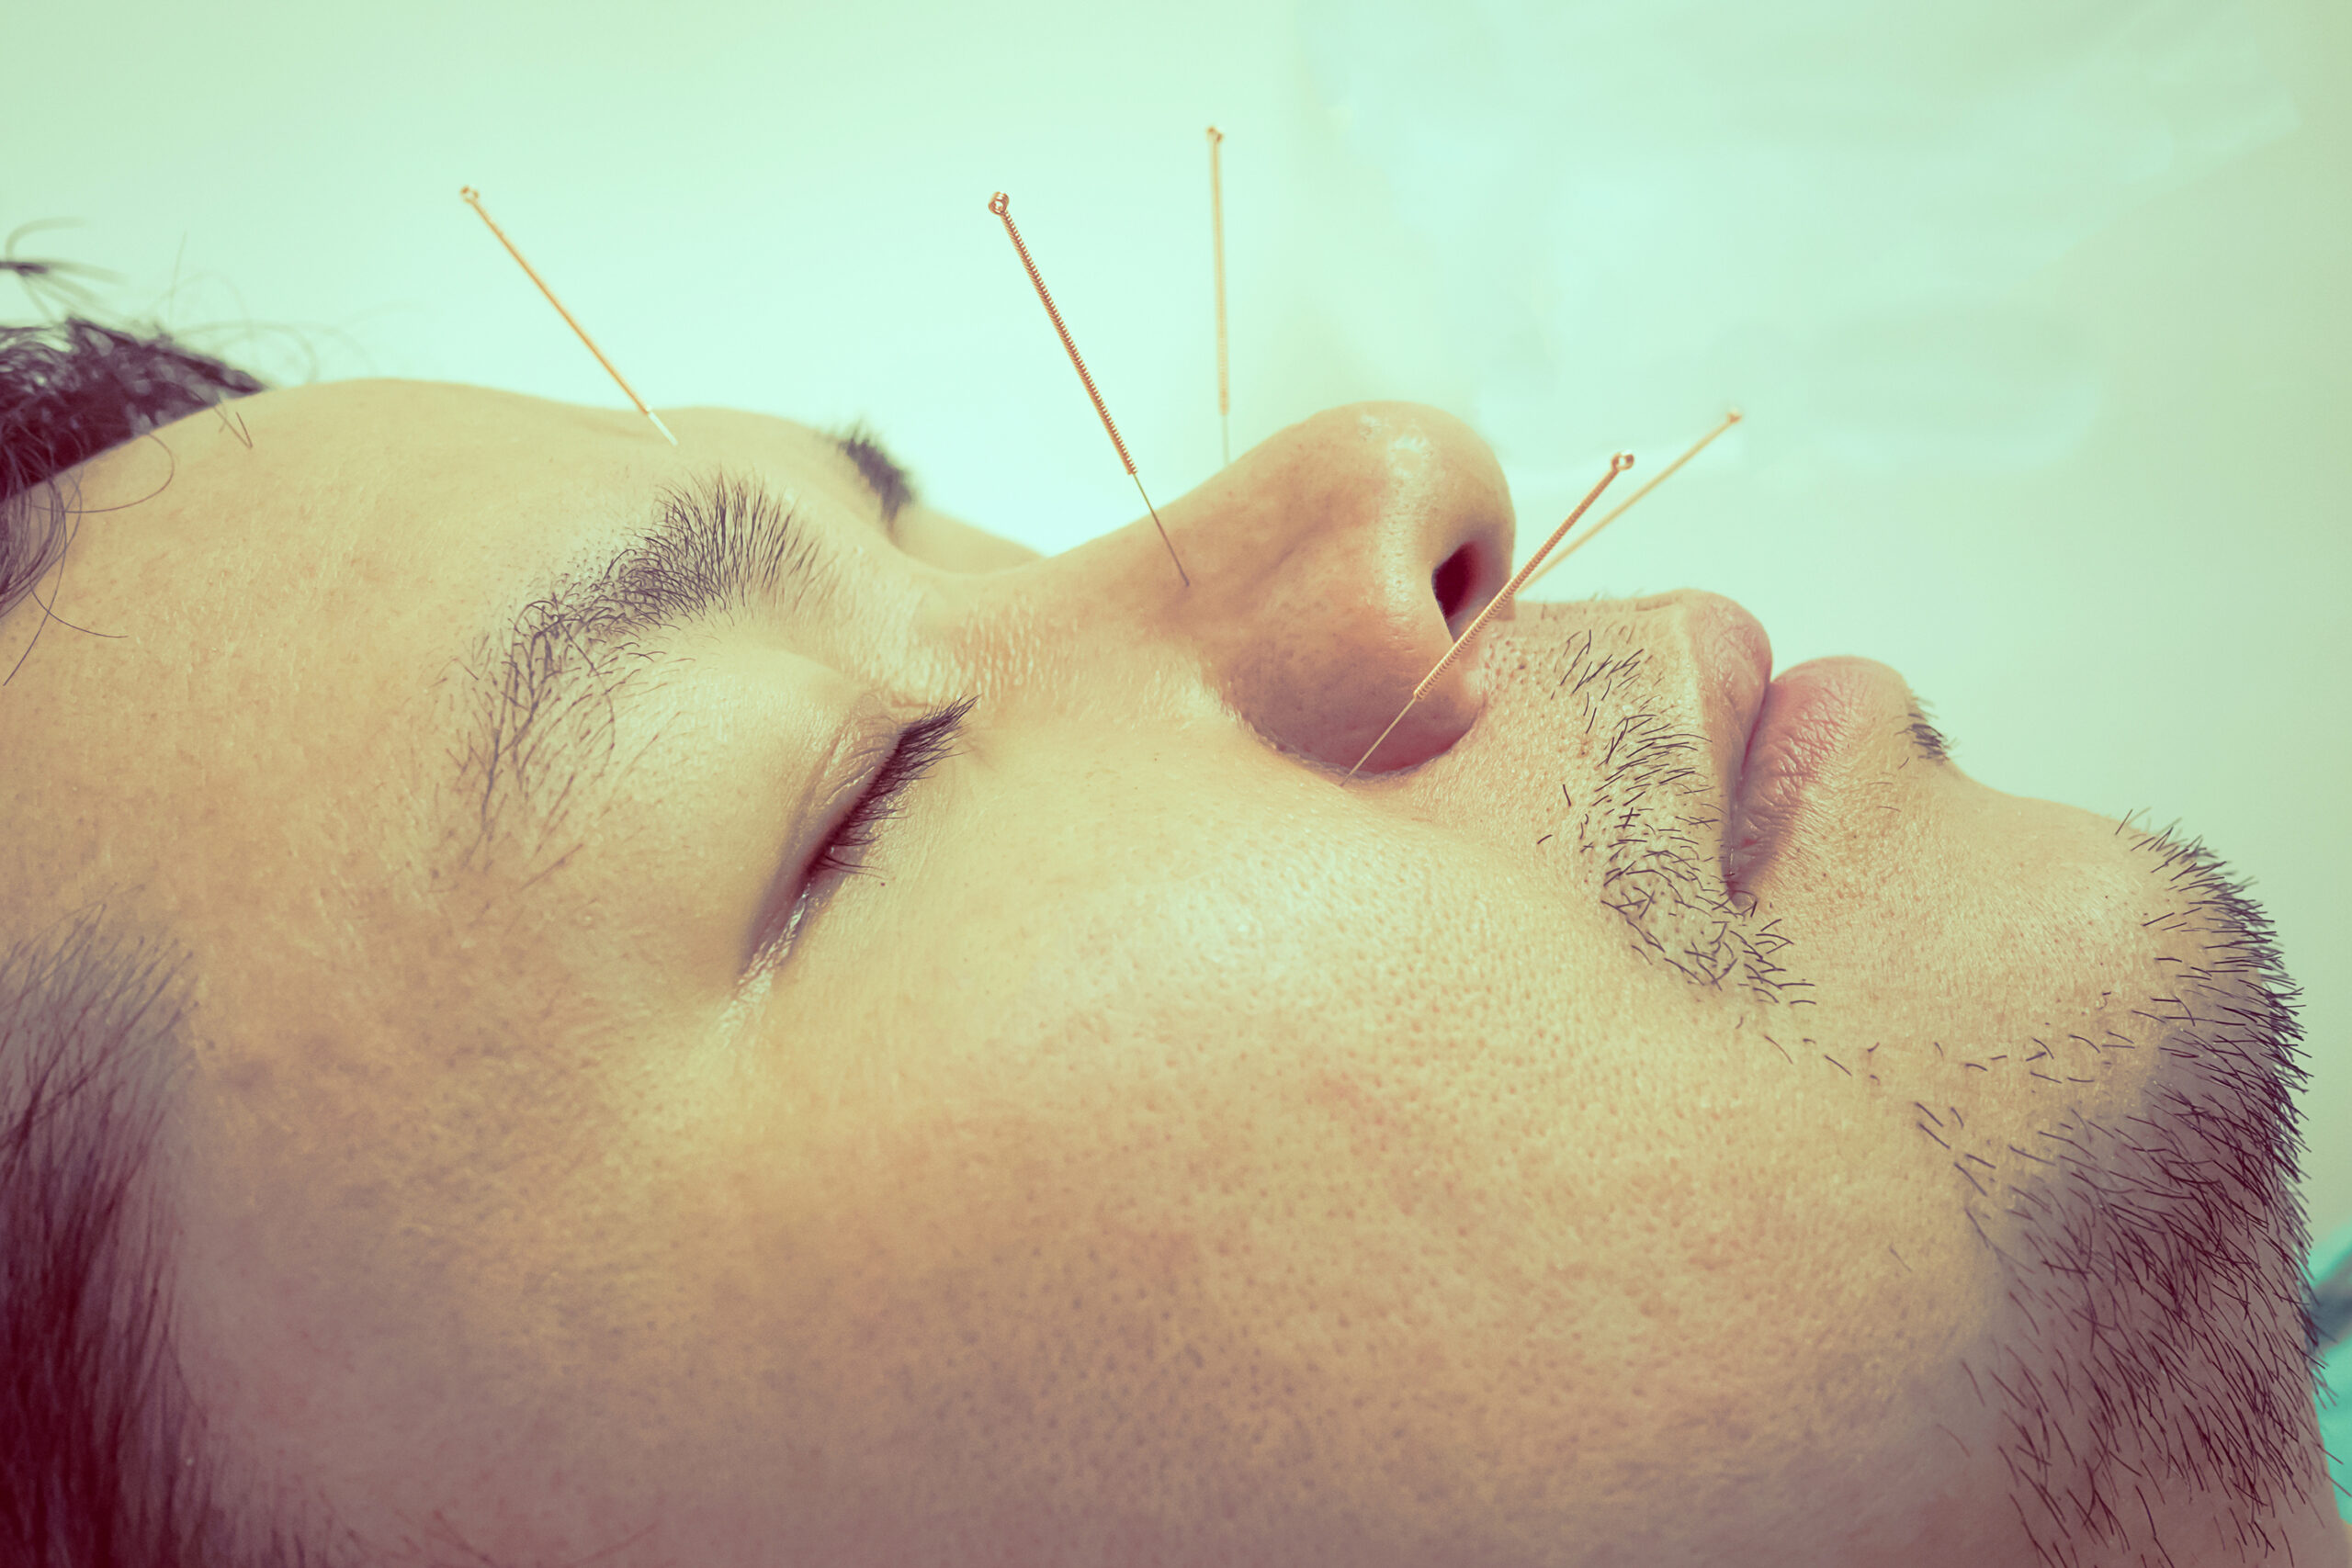 THE BENEFITS OF ACUPUNCTURE FOR ANXIETY AND DEPRESSION: A CLINICAL TRIAL